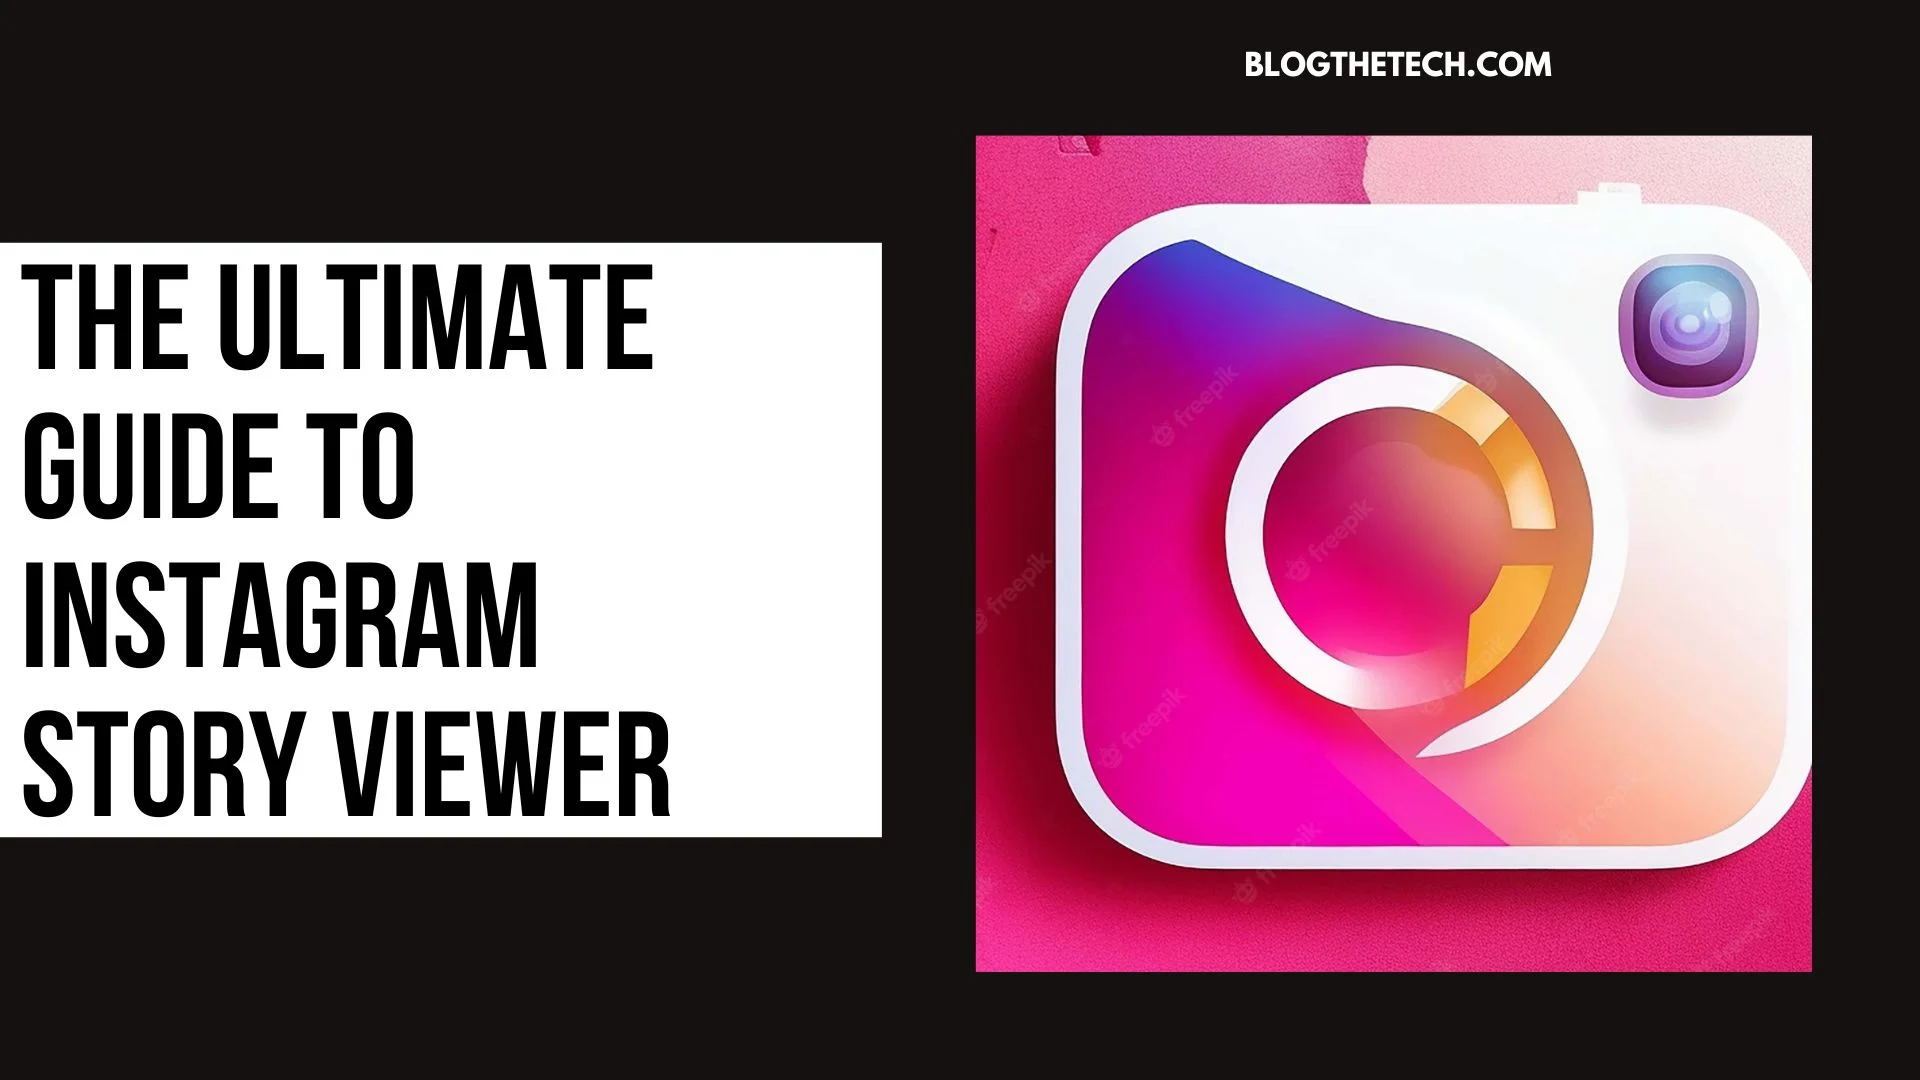 The Ultimate Guide to Instagram Story Viewer